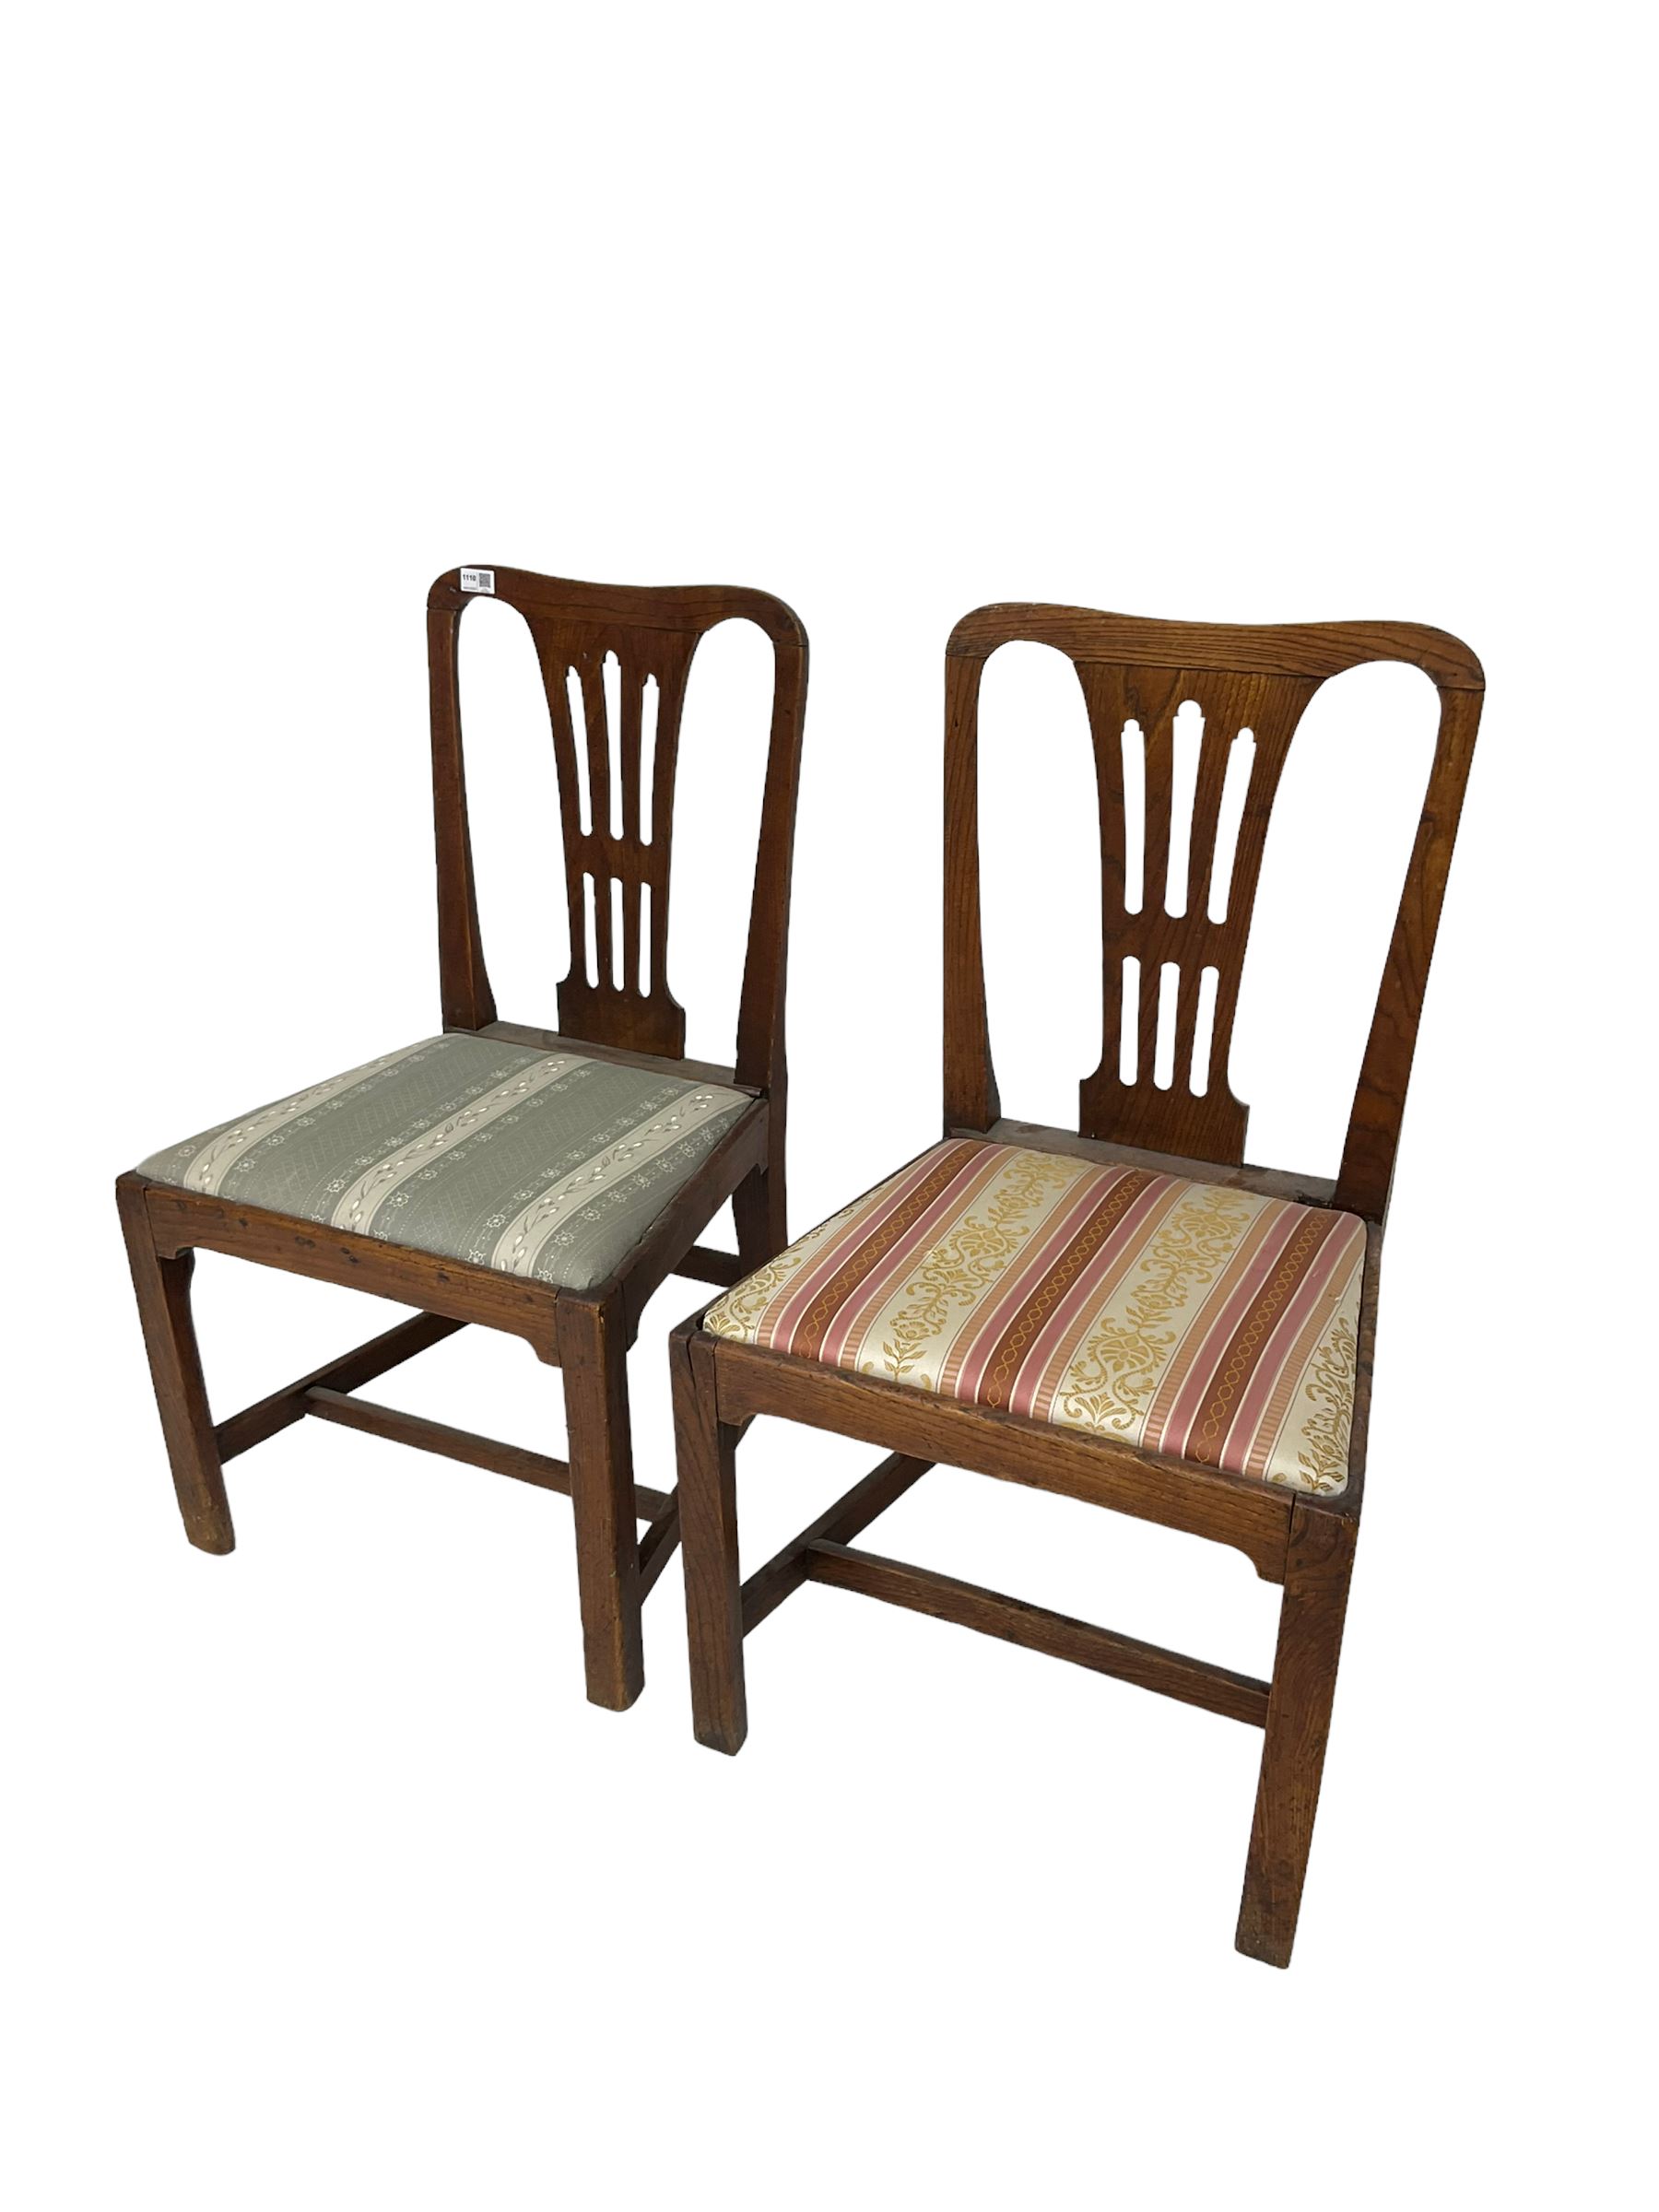 Pair 19th century elm chairs - Image 4 of 4